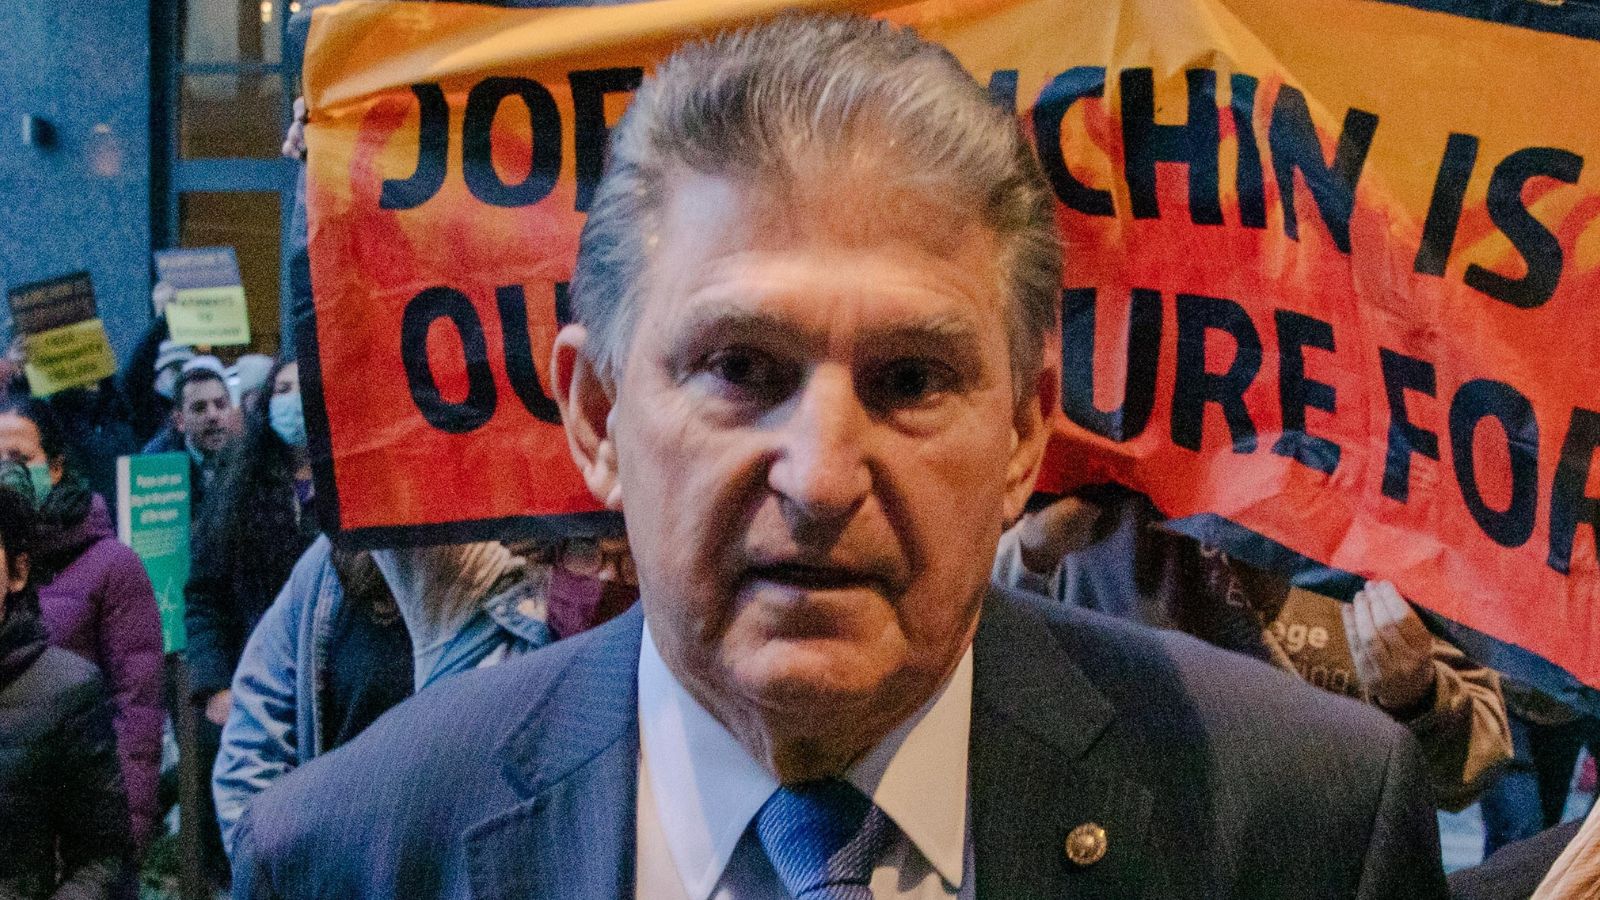 “The US Needs a Viable Third Party” – People Are Worried That Manchin Is Plotting To Undermine Dems in 2024